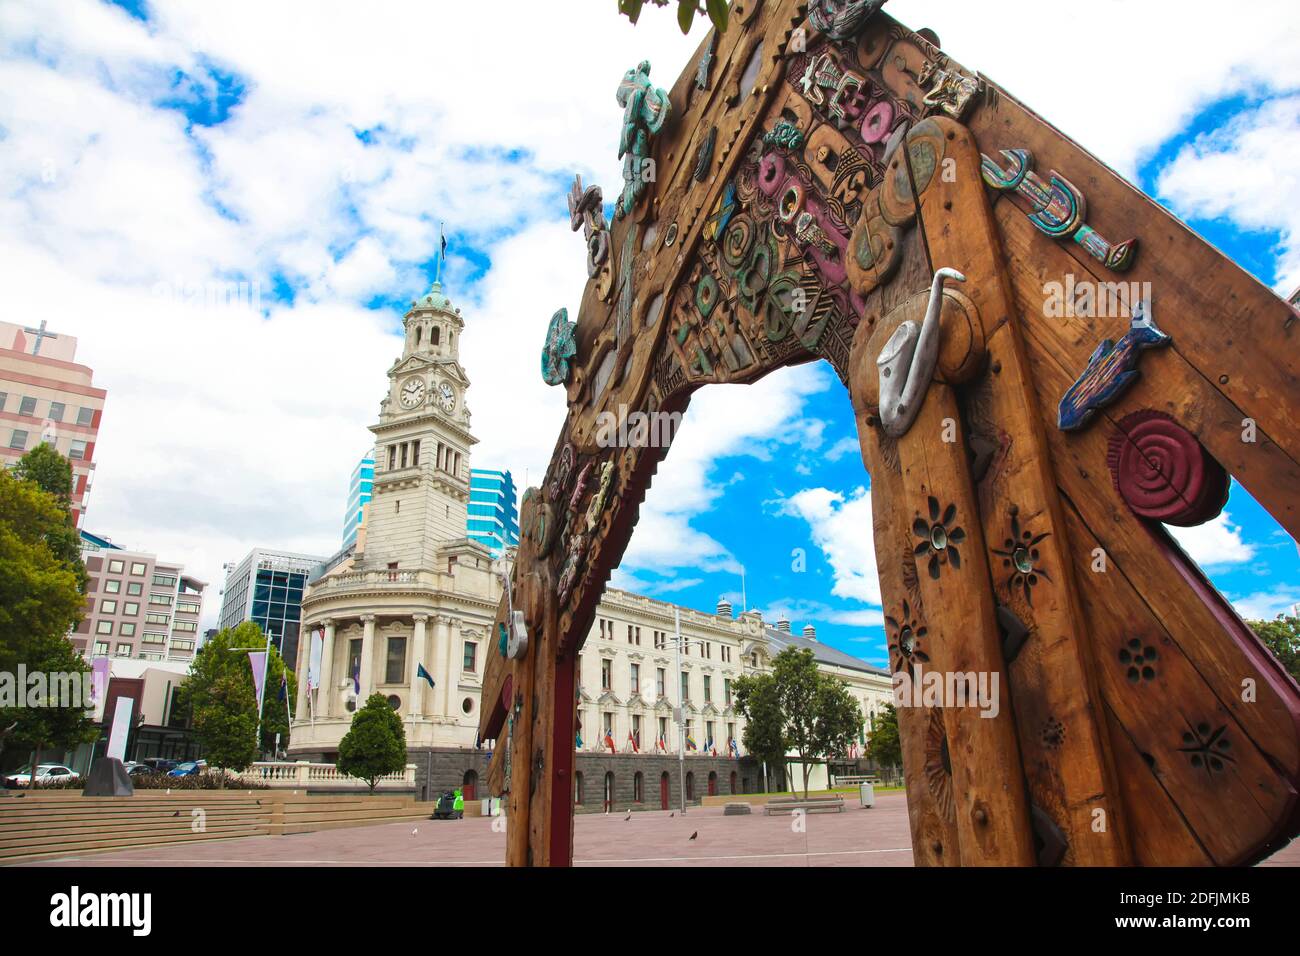 Waharoa gate inspired with Māori and Polynesian influences in Aotea Square, with Auckland Town Hall in the background. The Town Hall is a Edwardian bu Stock Photo